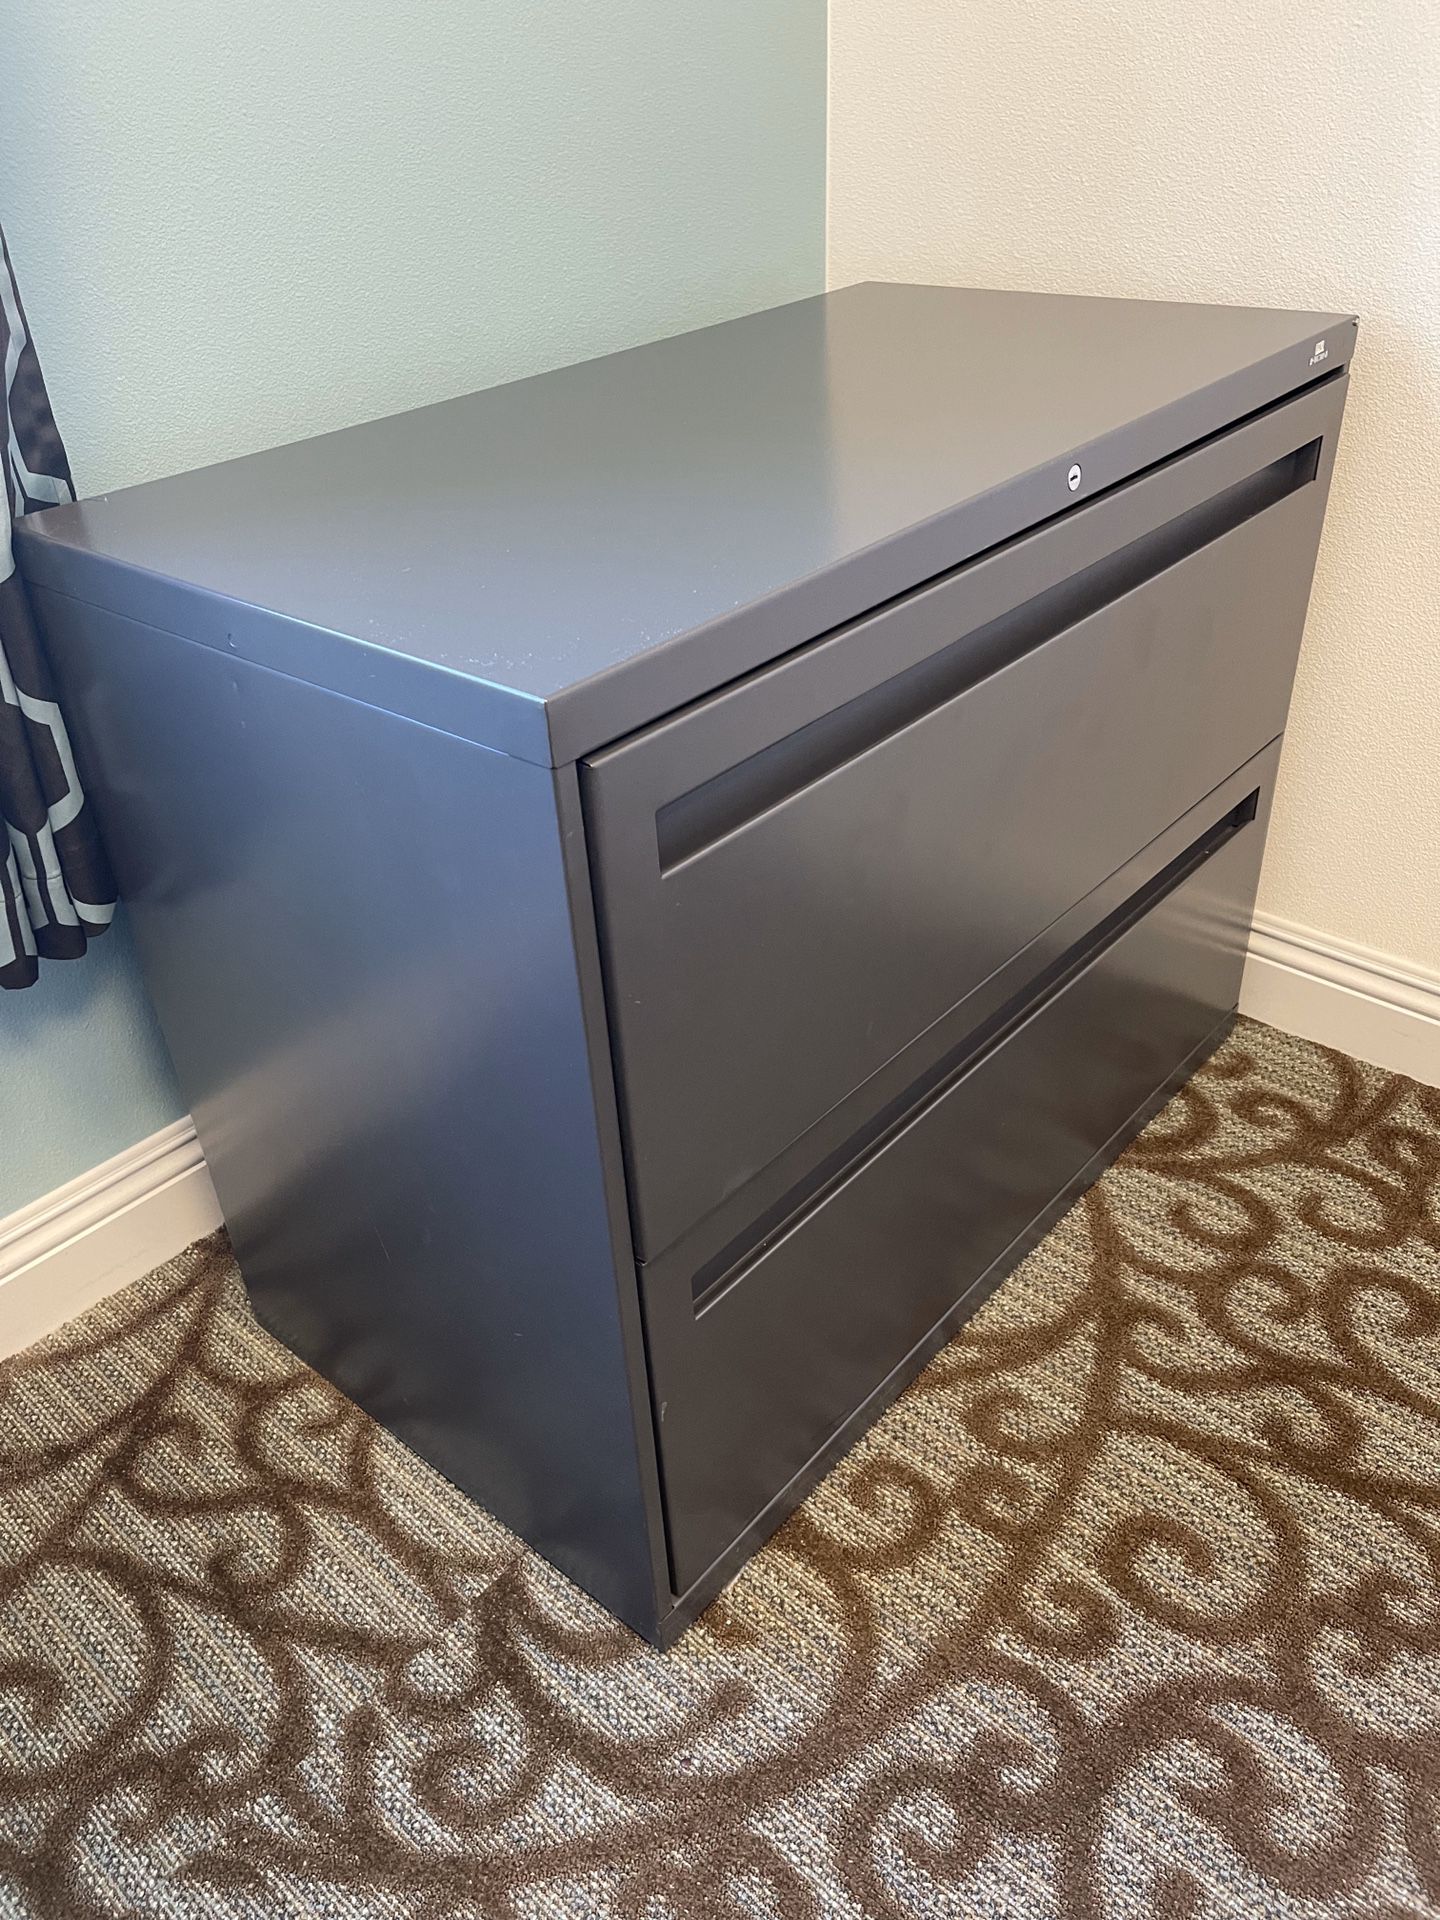 3 Charcoal Grey Like New File Cabinets 